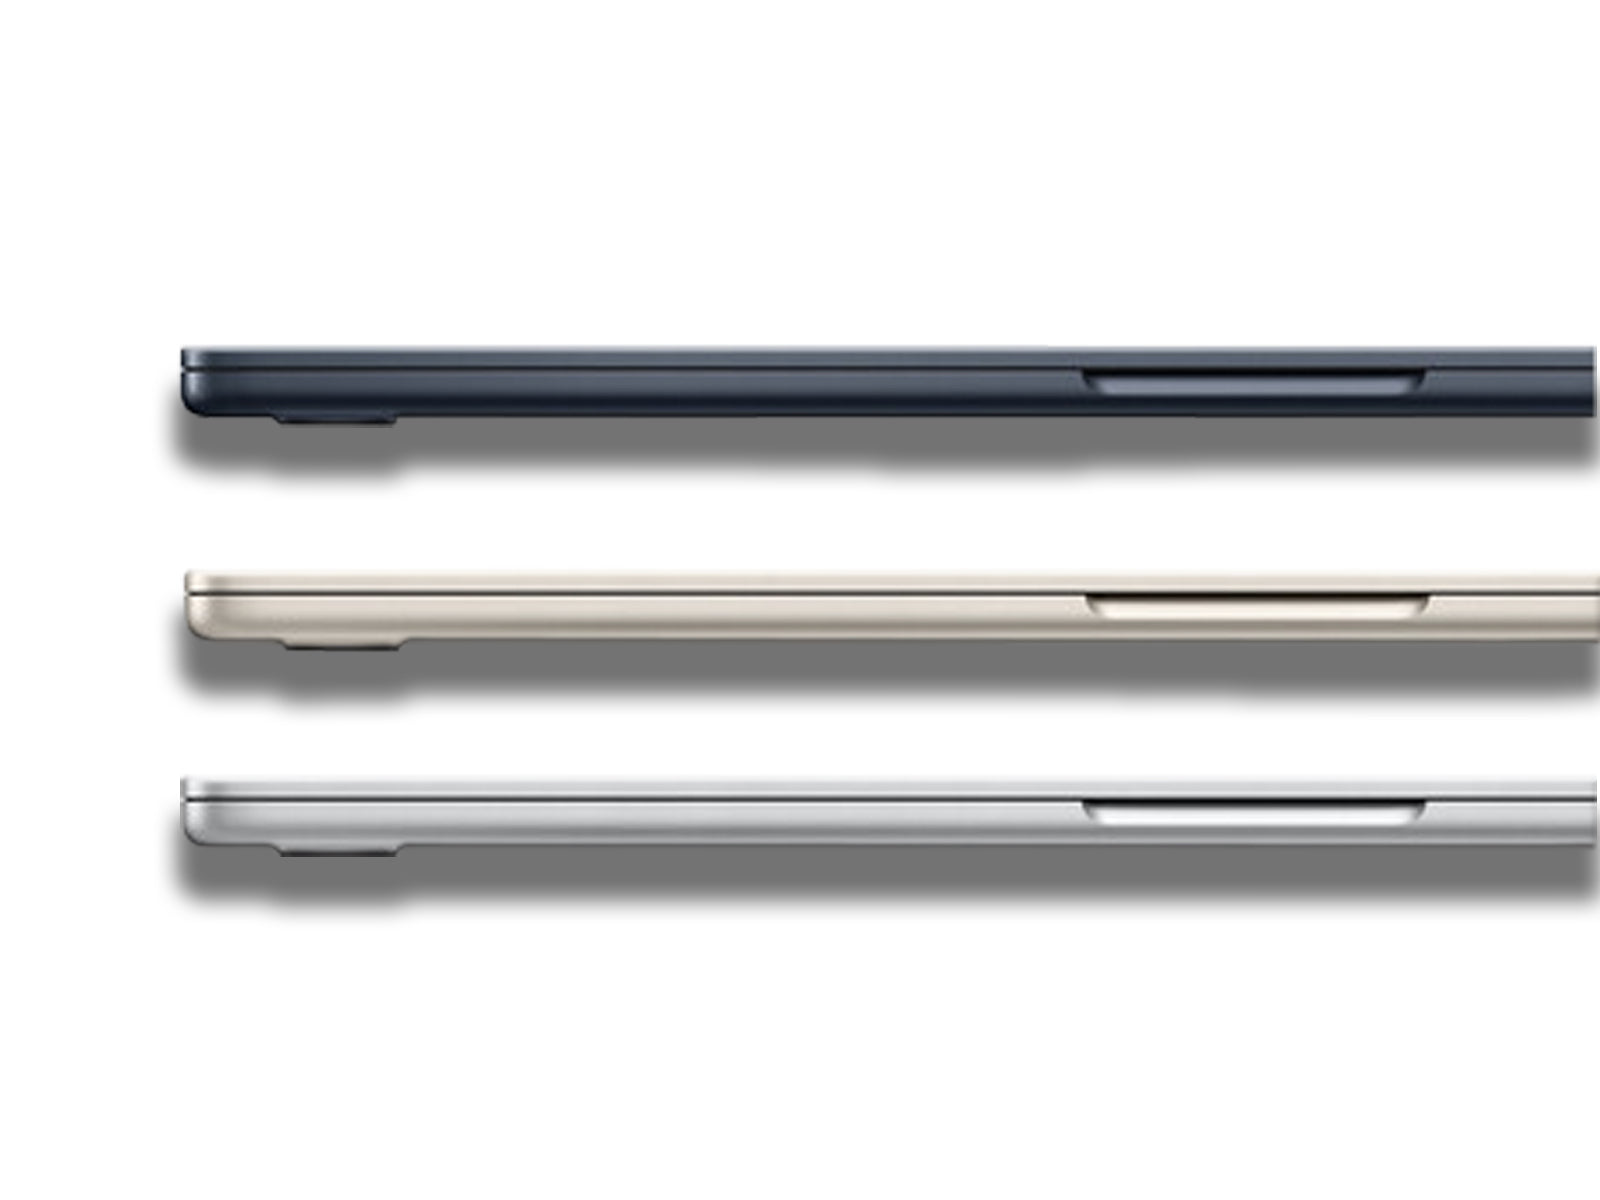 Apple MacBook Air 2023 In Midnight, Silver, And Starlight Side